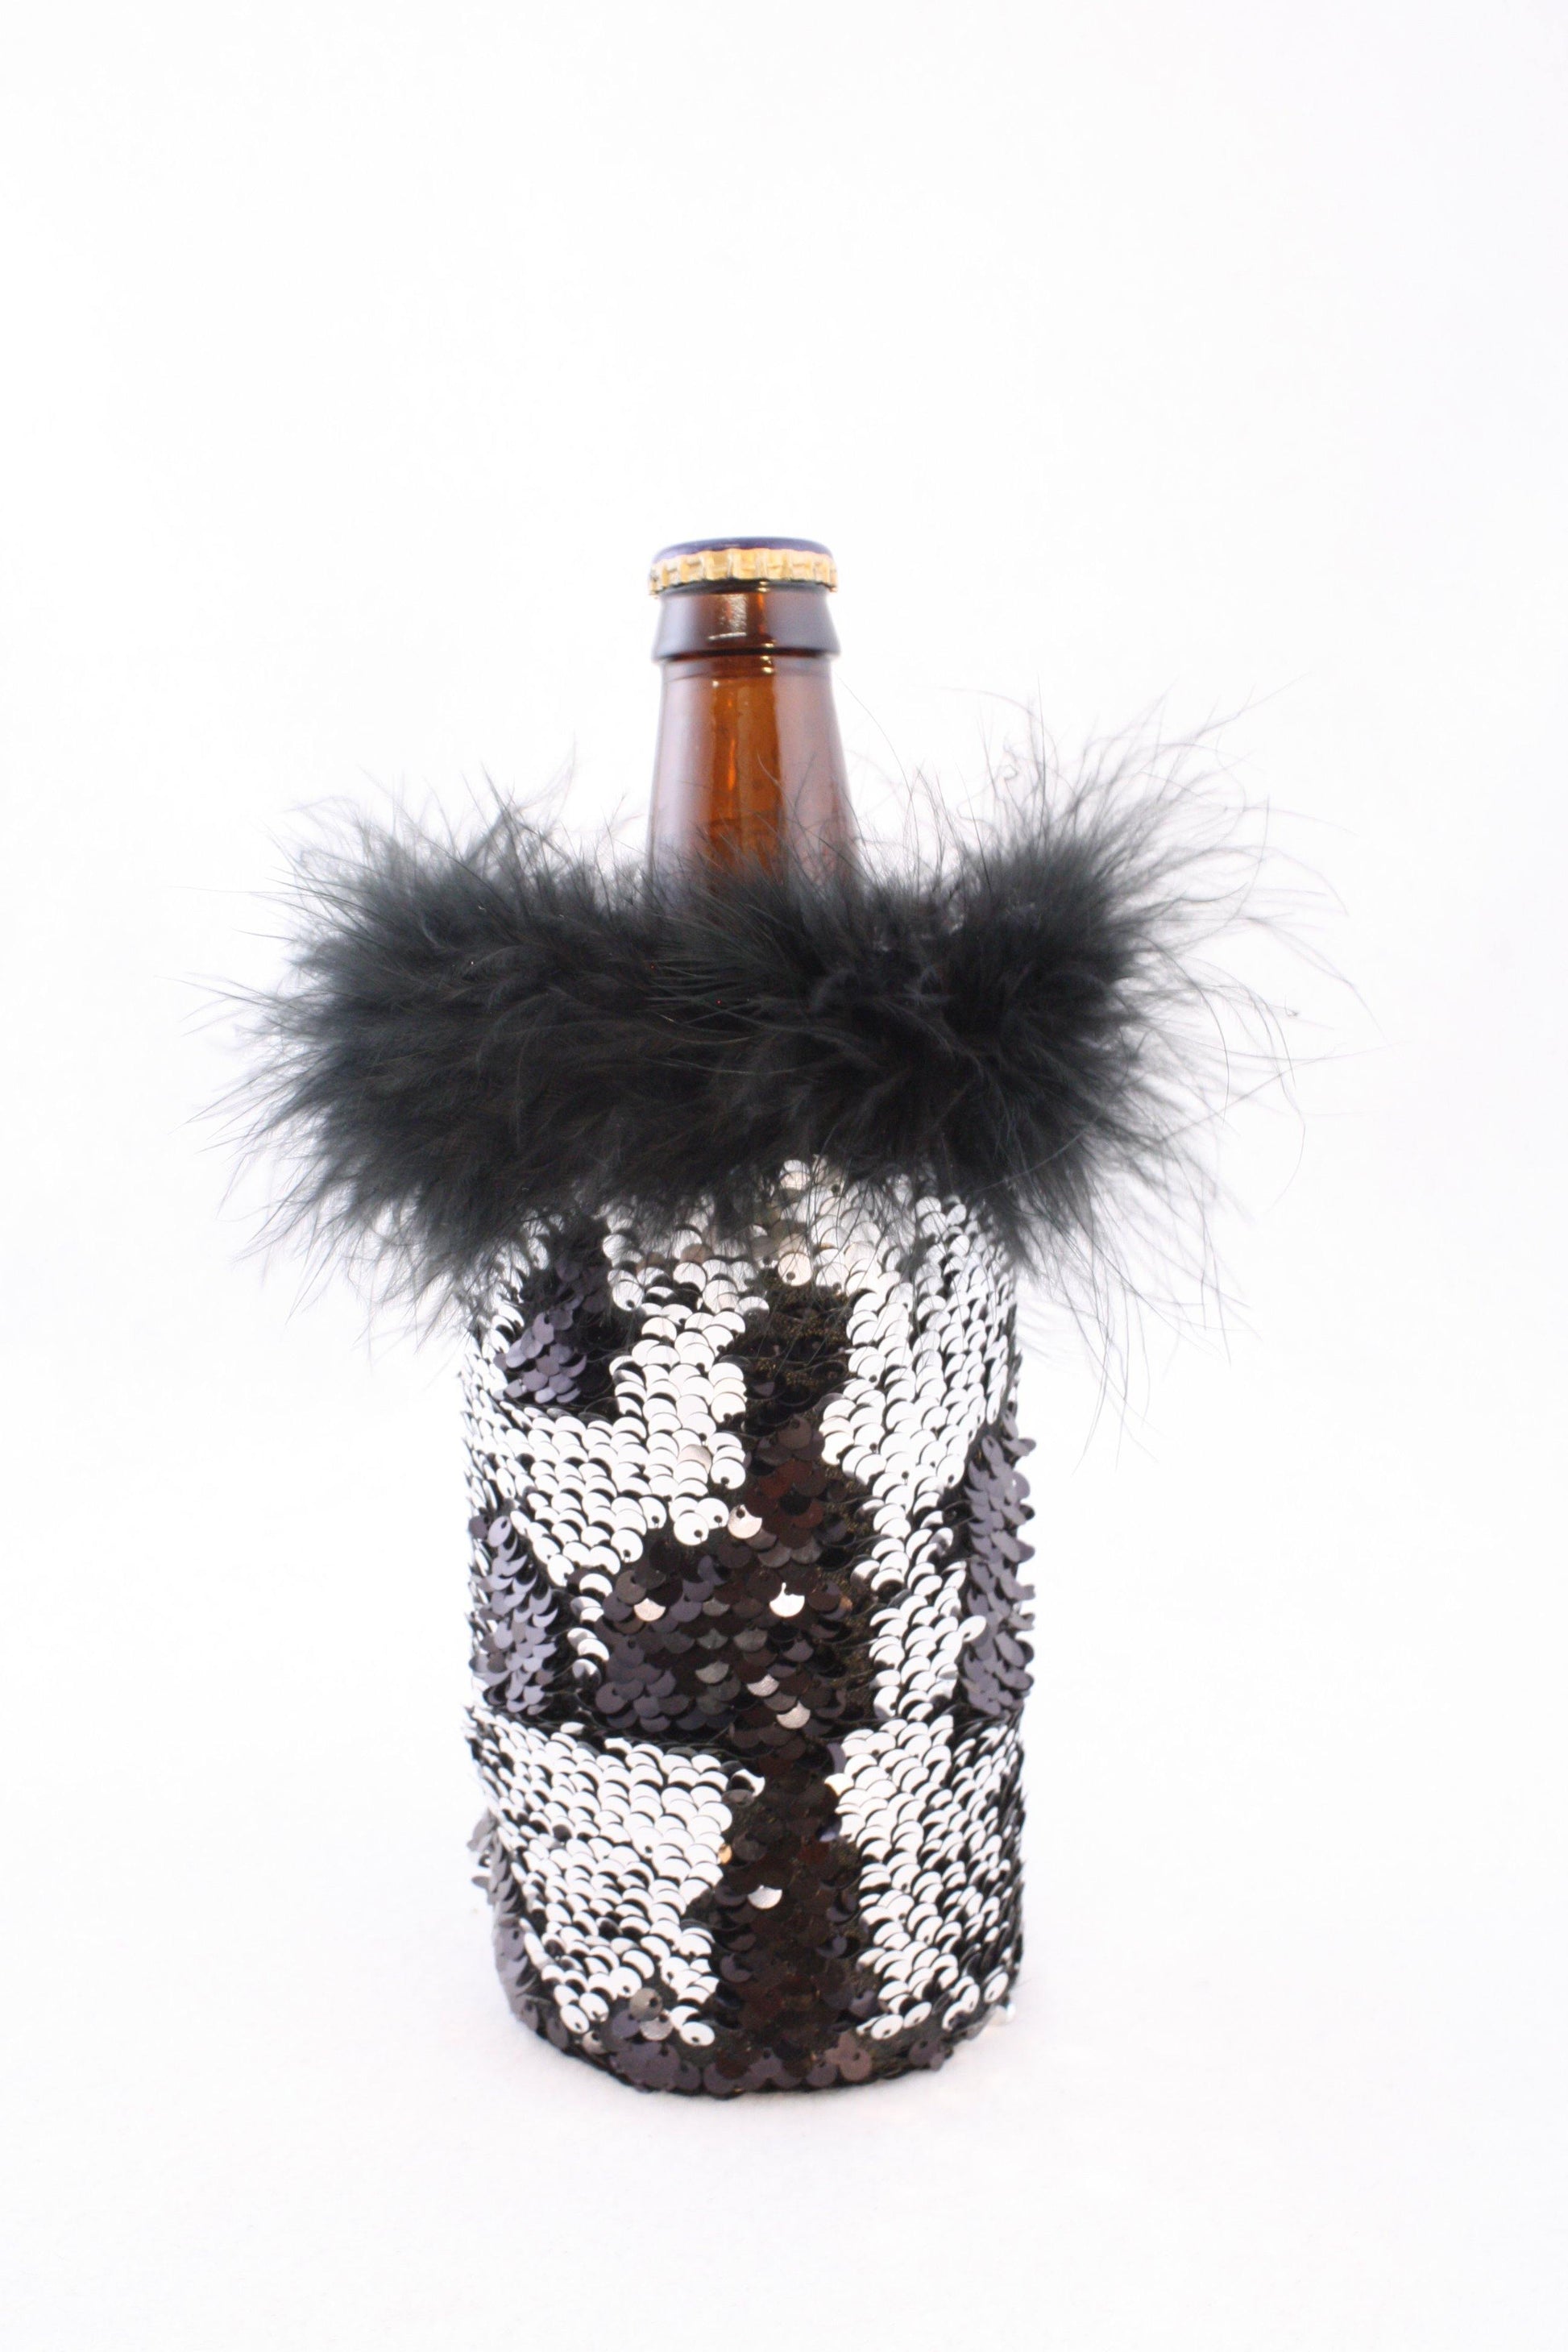 Black and Silver Reversible Mermaid Sequin Fabric Beer Coolies for Water or Beer Bottles - Tipsy Totes | Wine Gifts | Beer Koozies | Wine Totes | Simply Fabulous